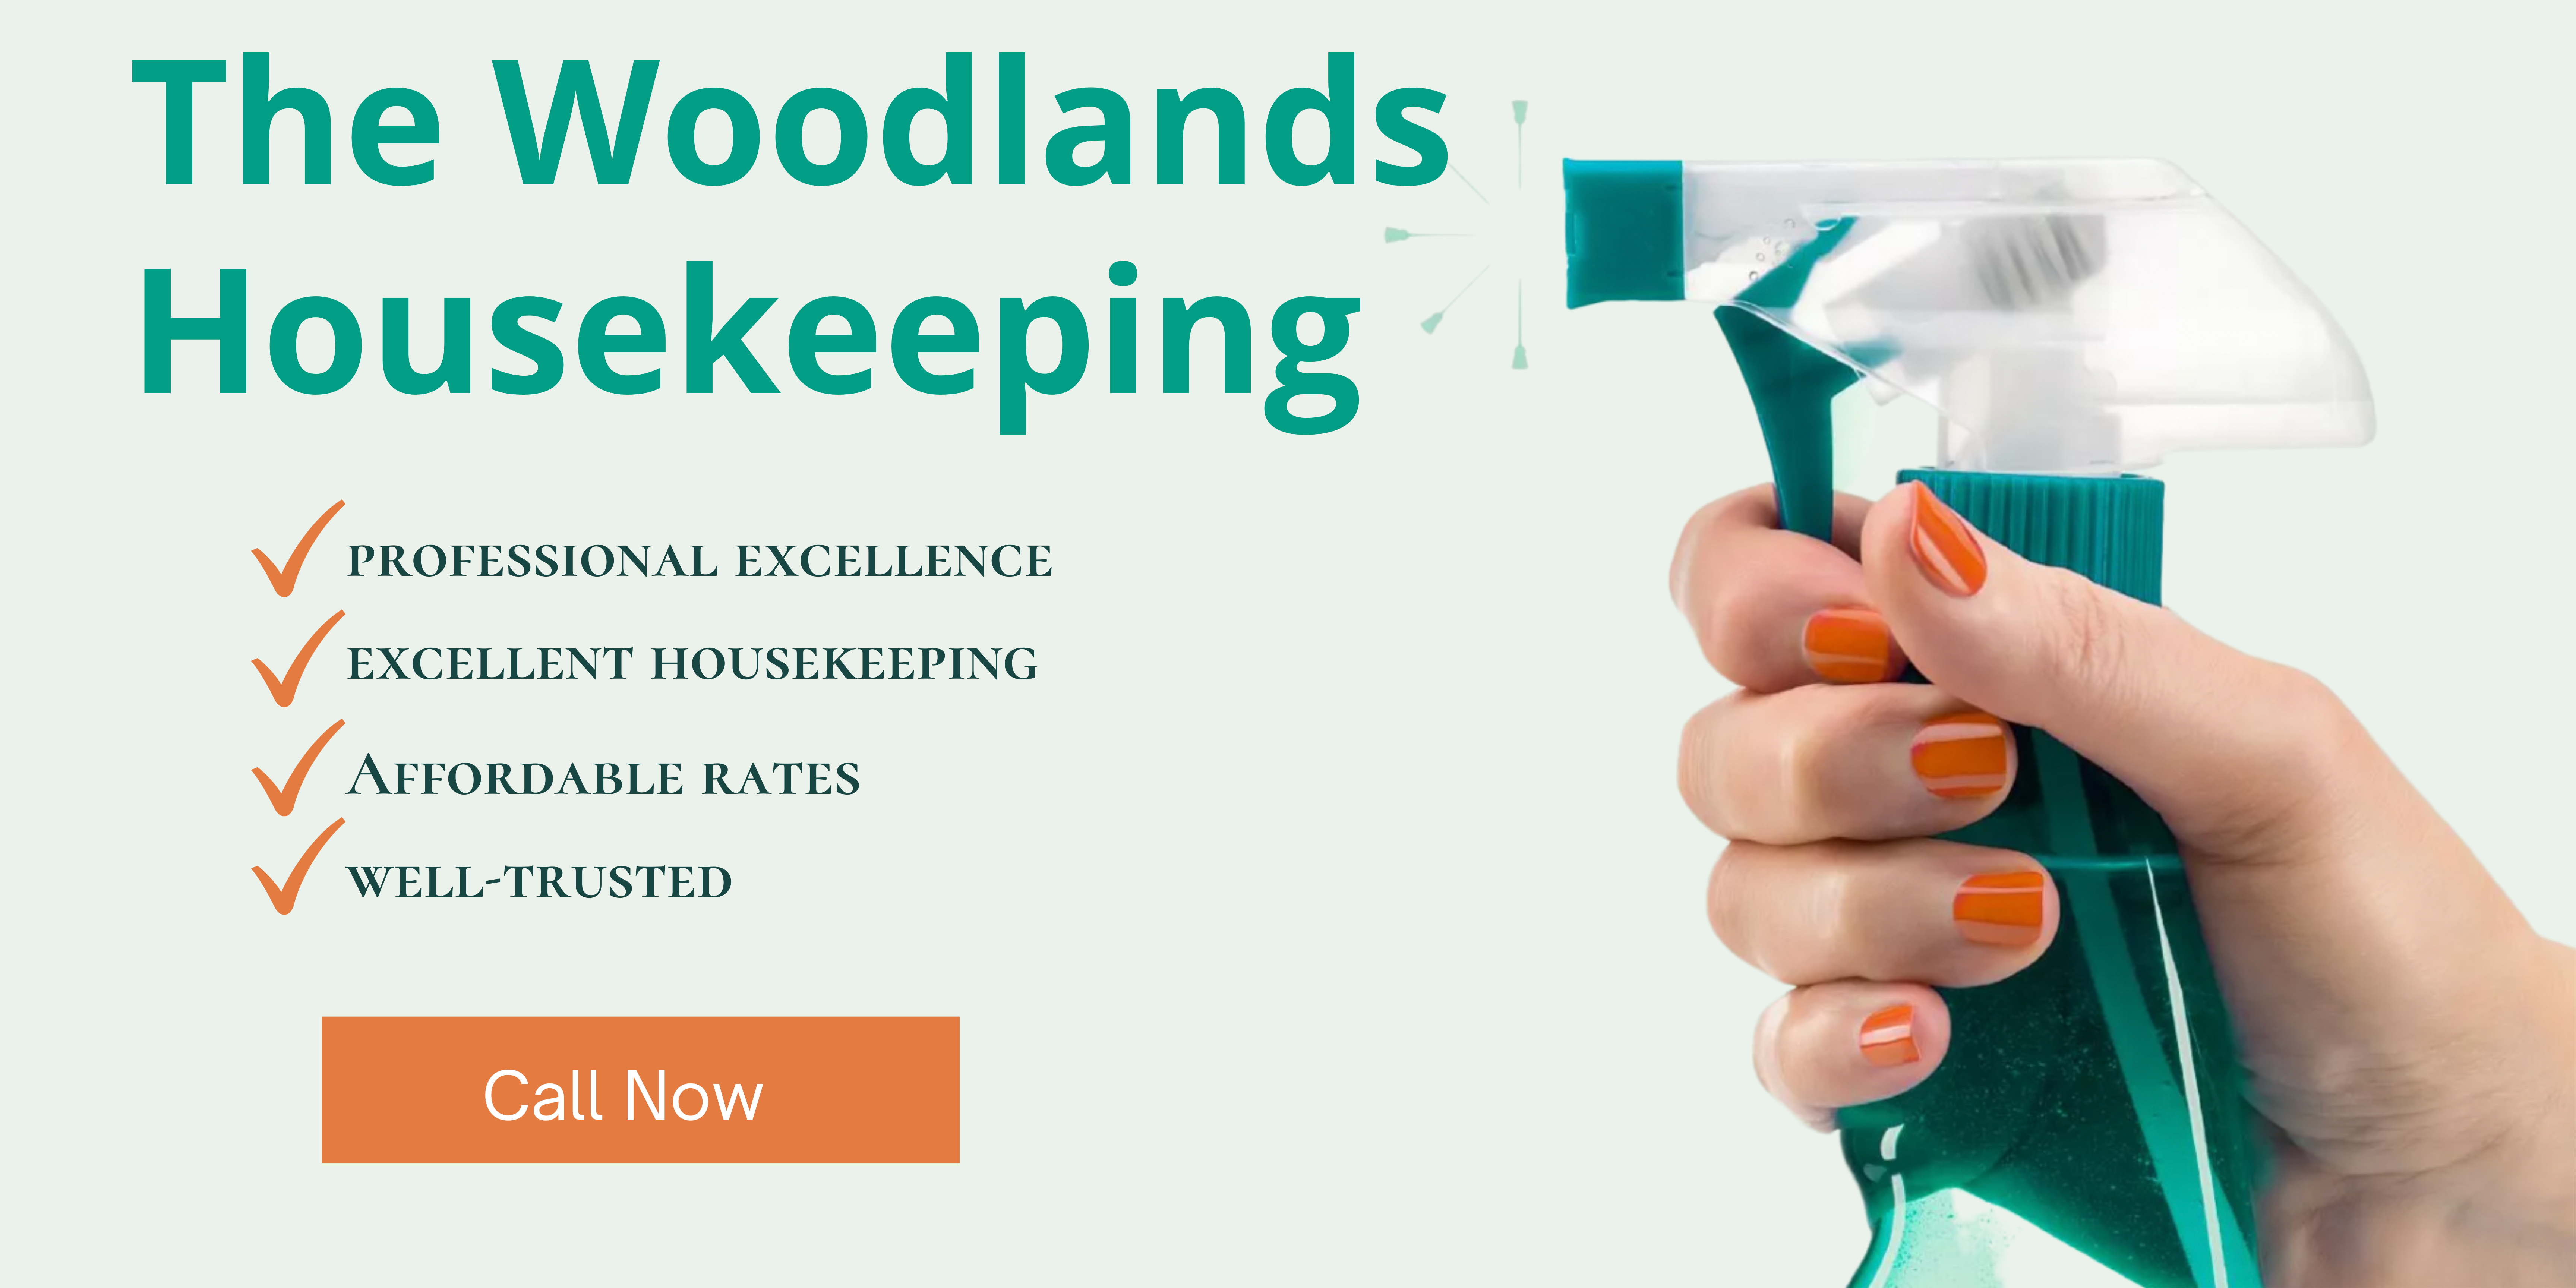 The Woodlands Housekeeping Company